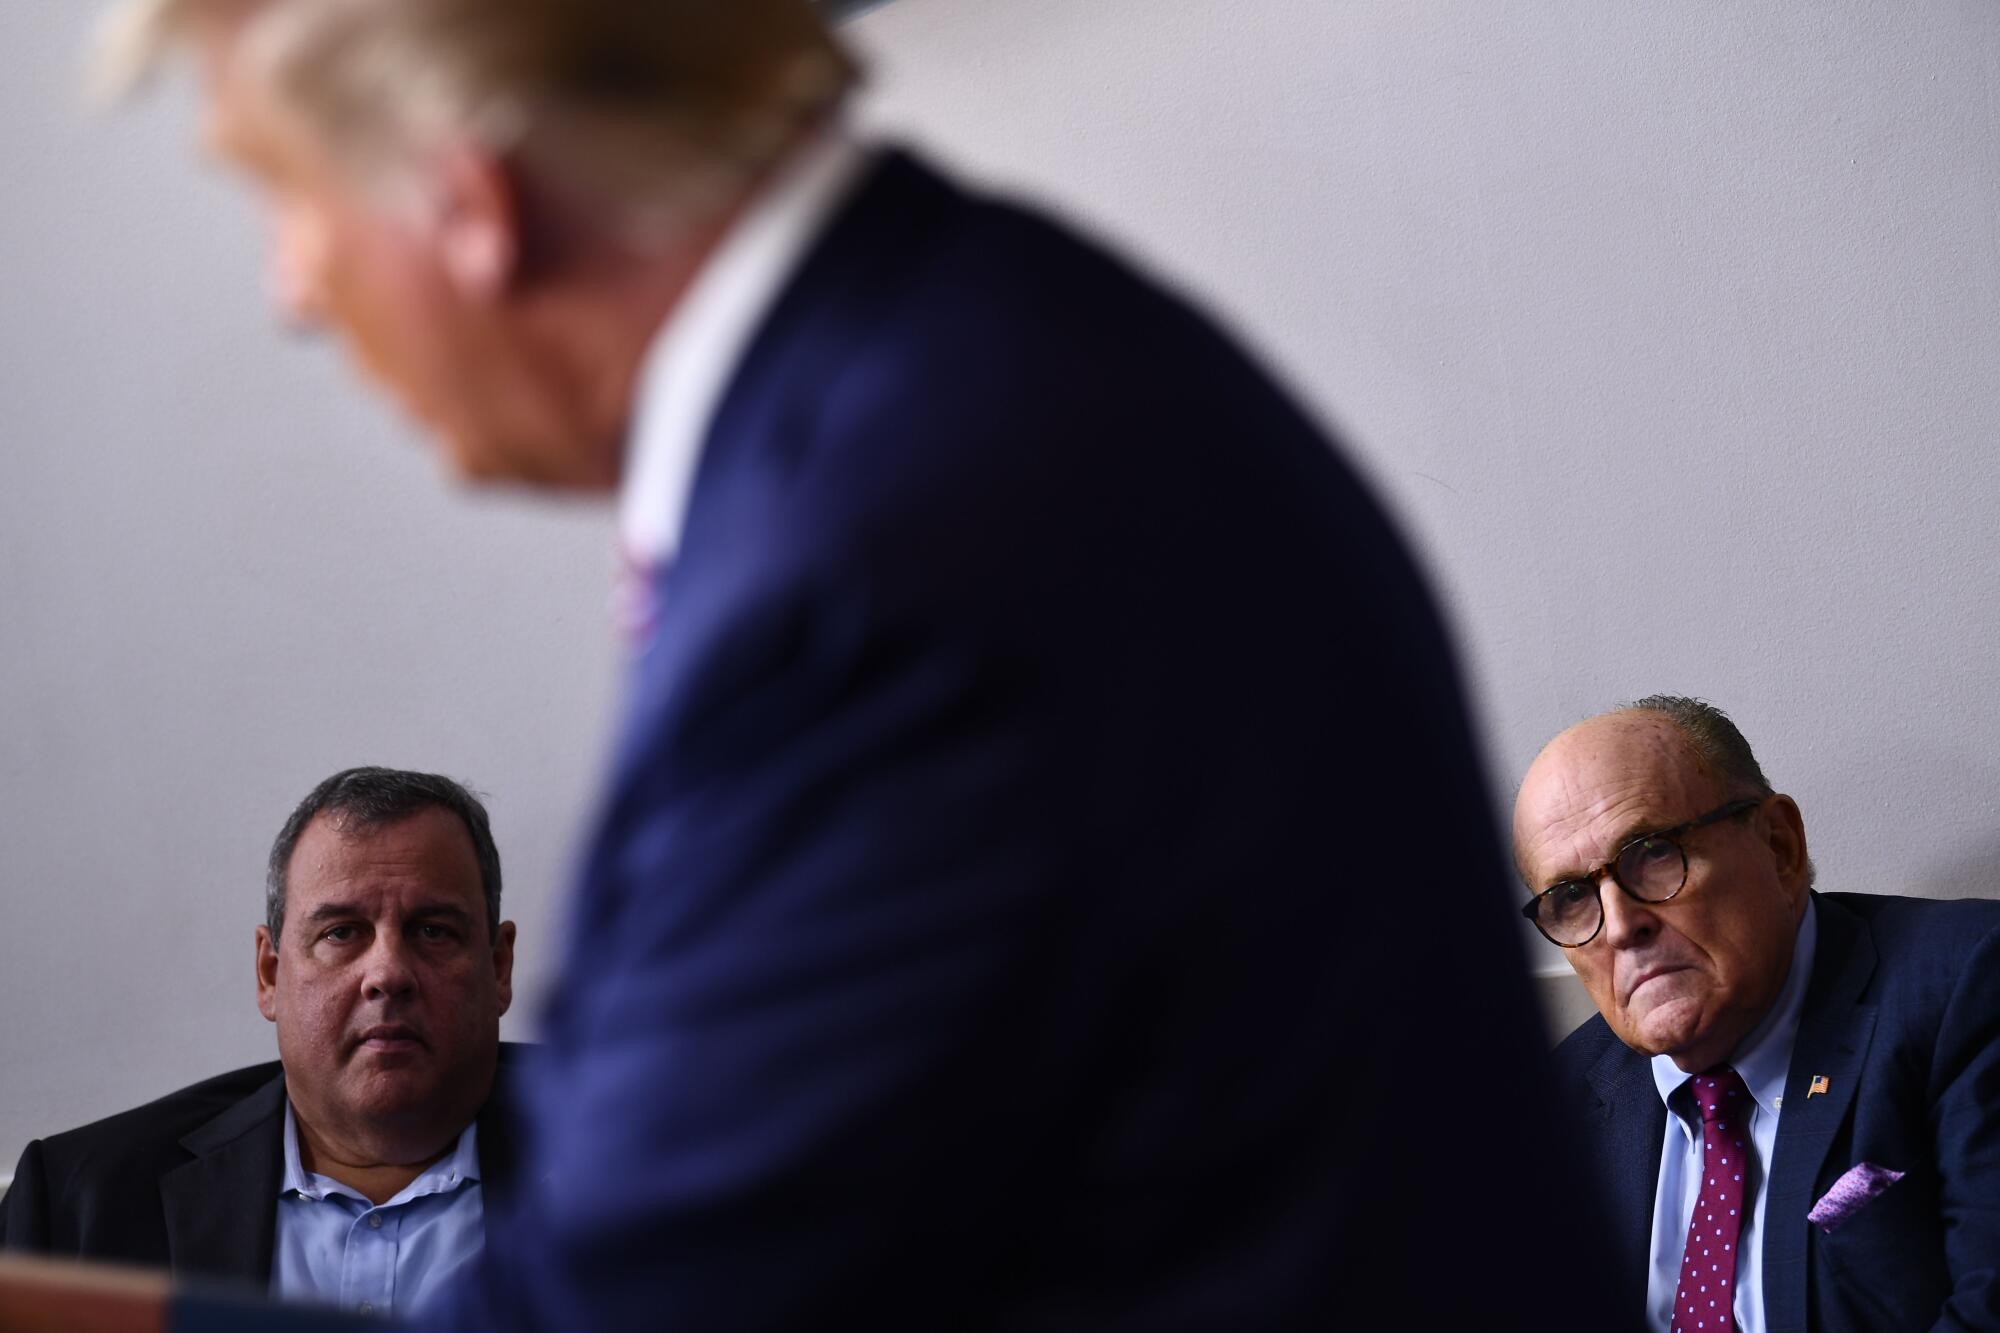 President Trump meets with former New Jersey Governor Chris Christie and former New York City Mayor Rudy Giuliani on Sunday